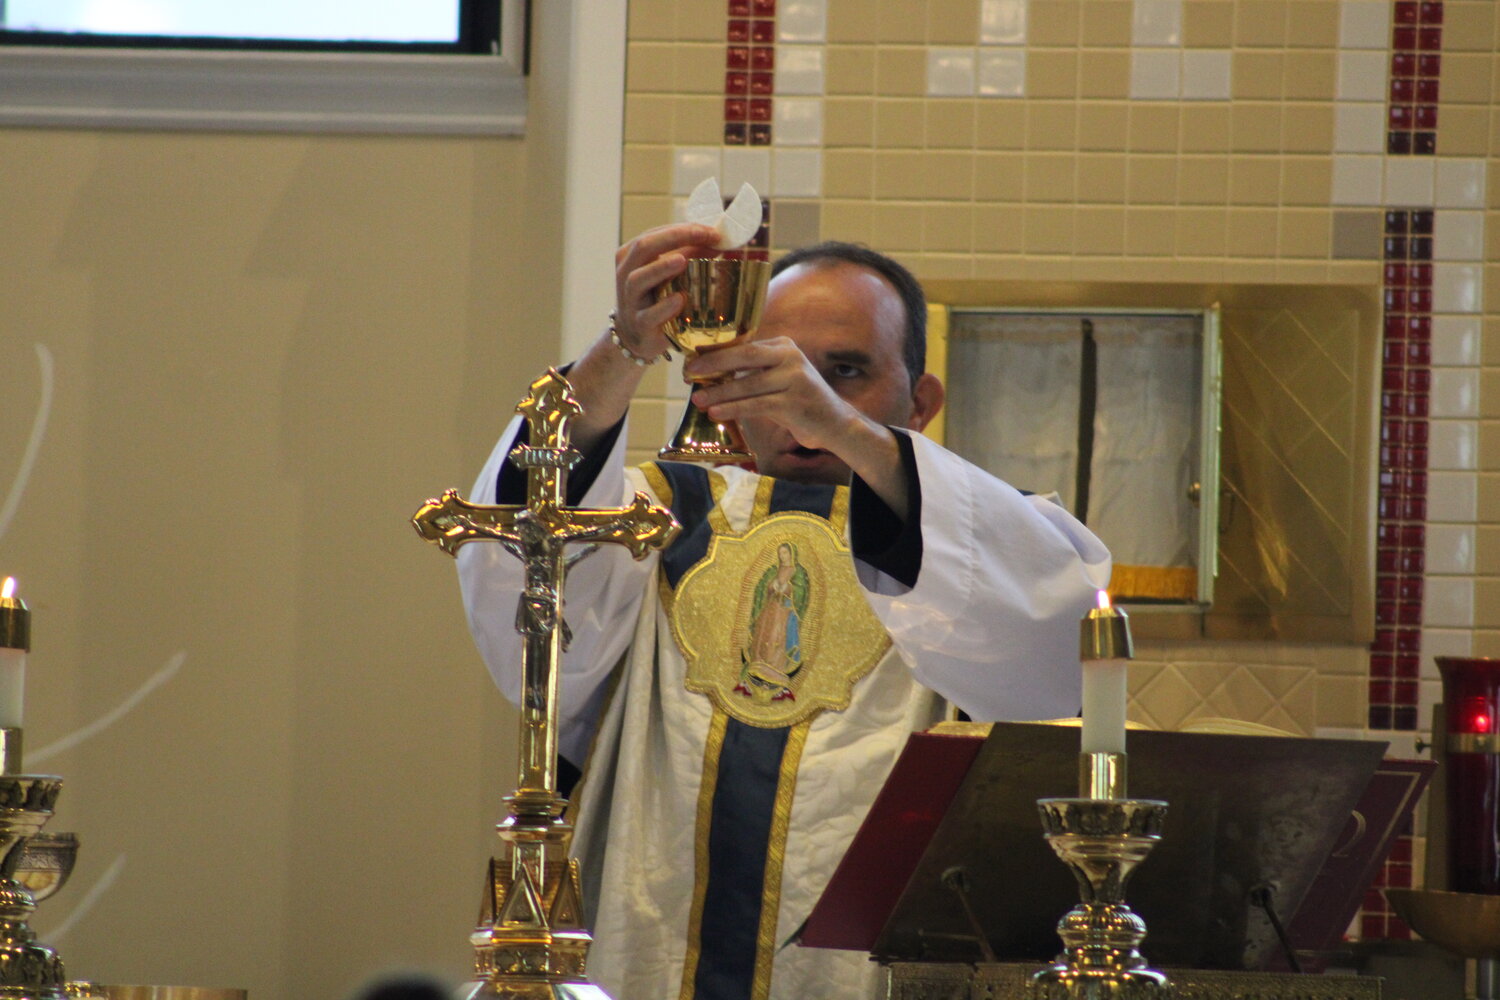 Father Eddie prepares the Eucharist during the Aug. 22 Mass at Holy Rosary.